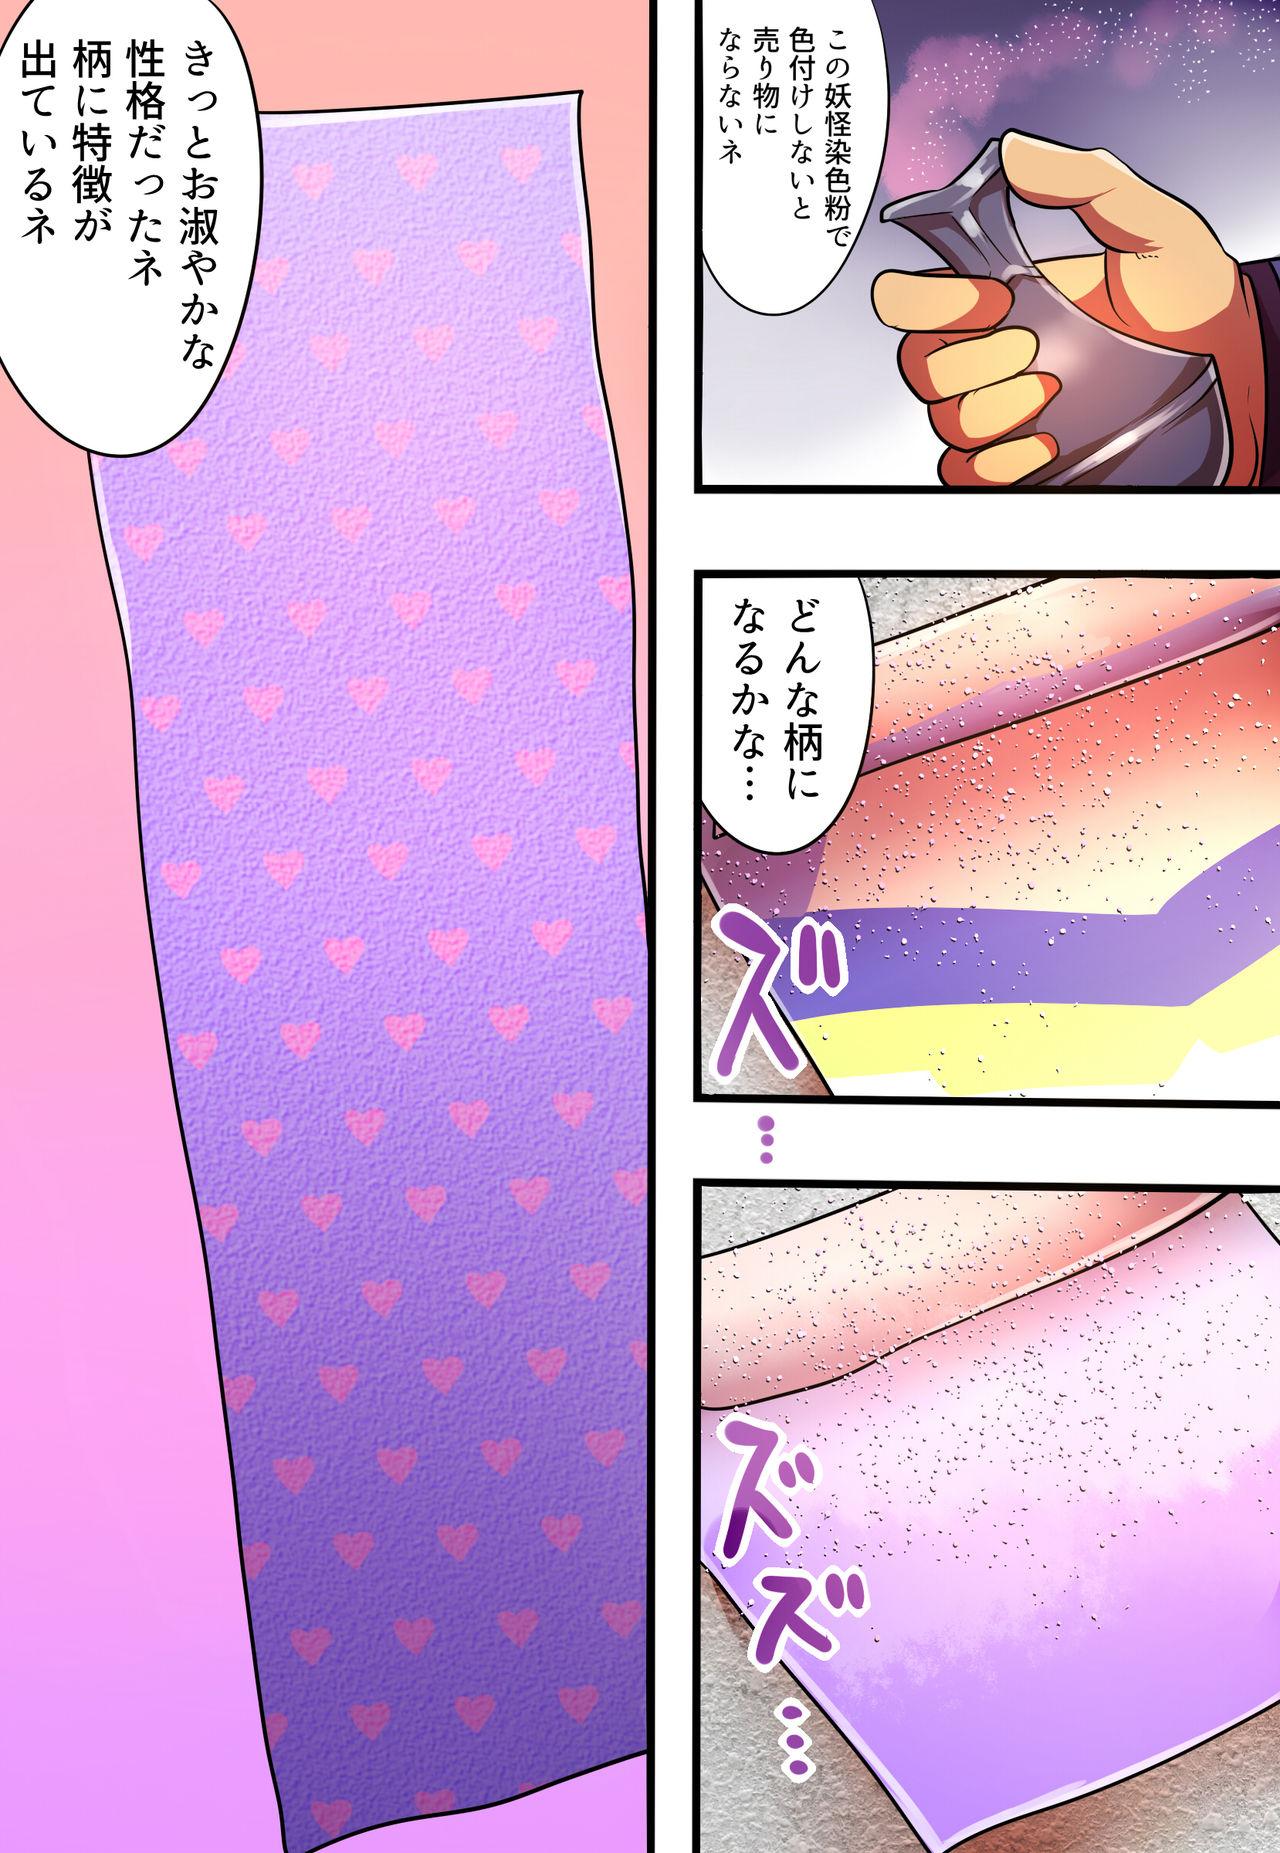 Shaved Pussy shinenkan Comic of Textile-ification ghost storys Livecam - Page 4